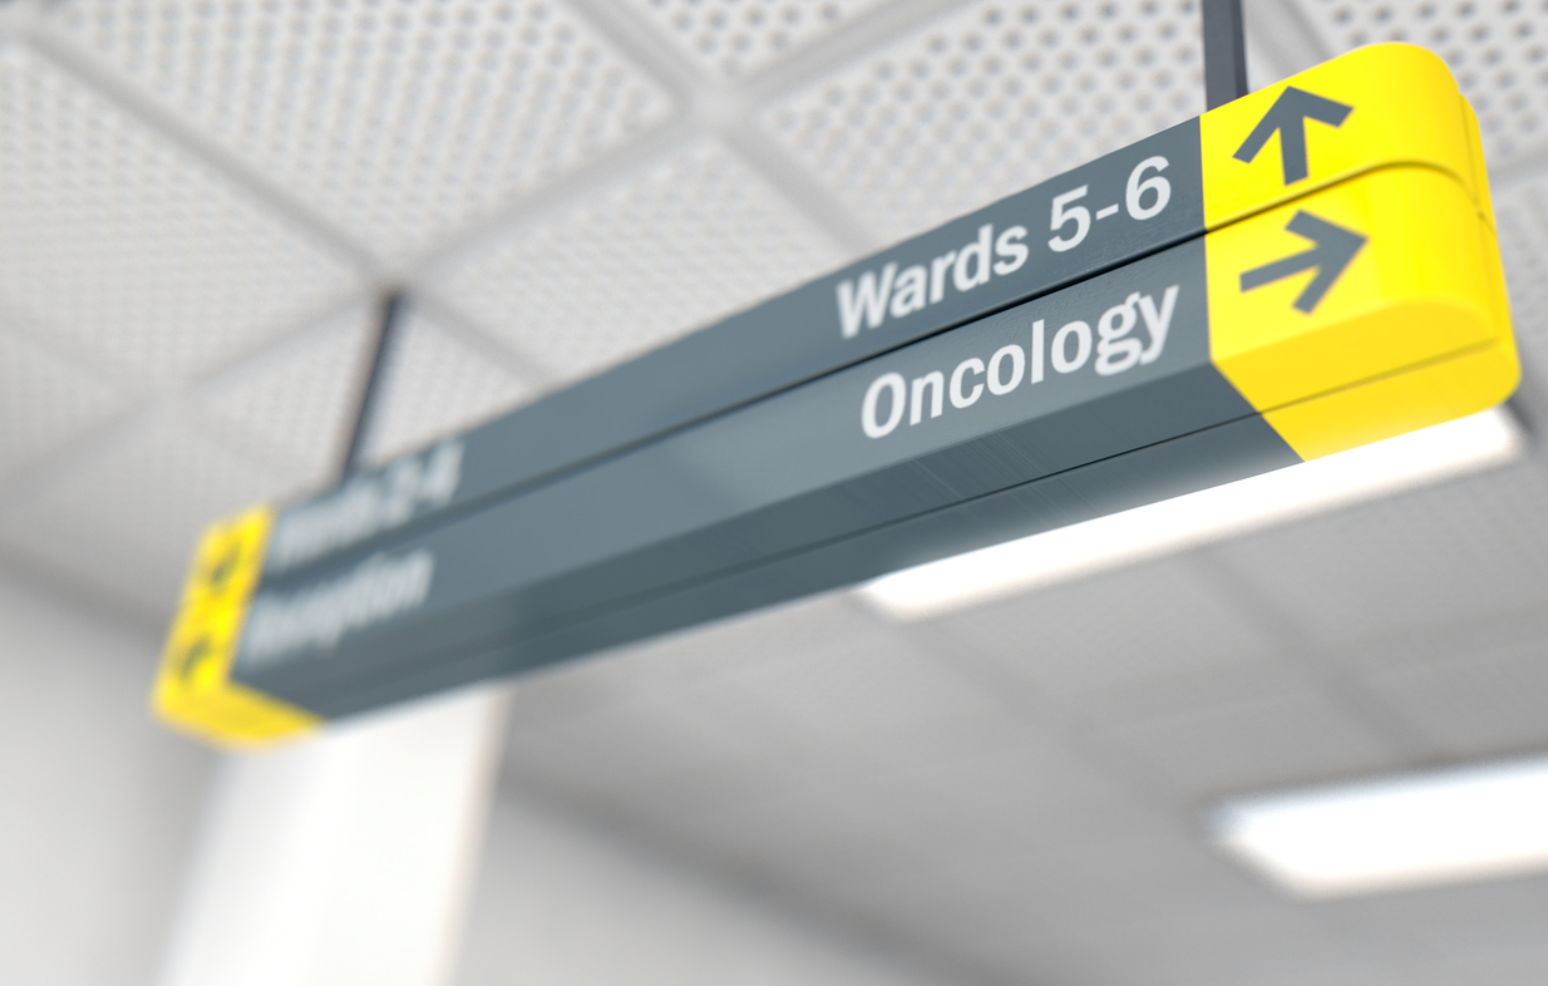 Community Oncology Experts Review Challenges, Opportunities to Coexist With Health Systems